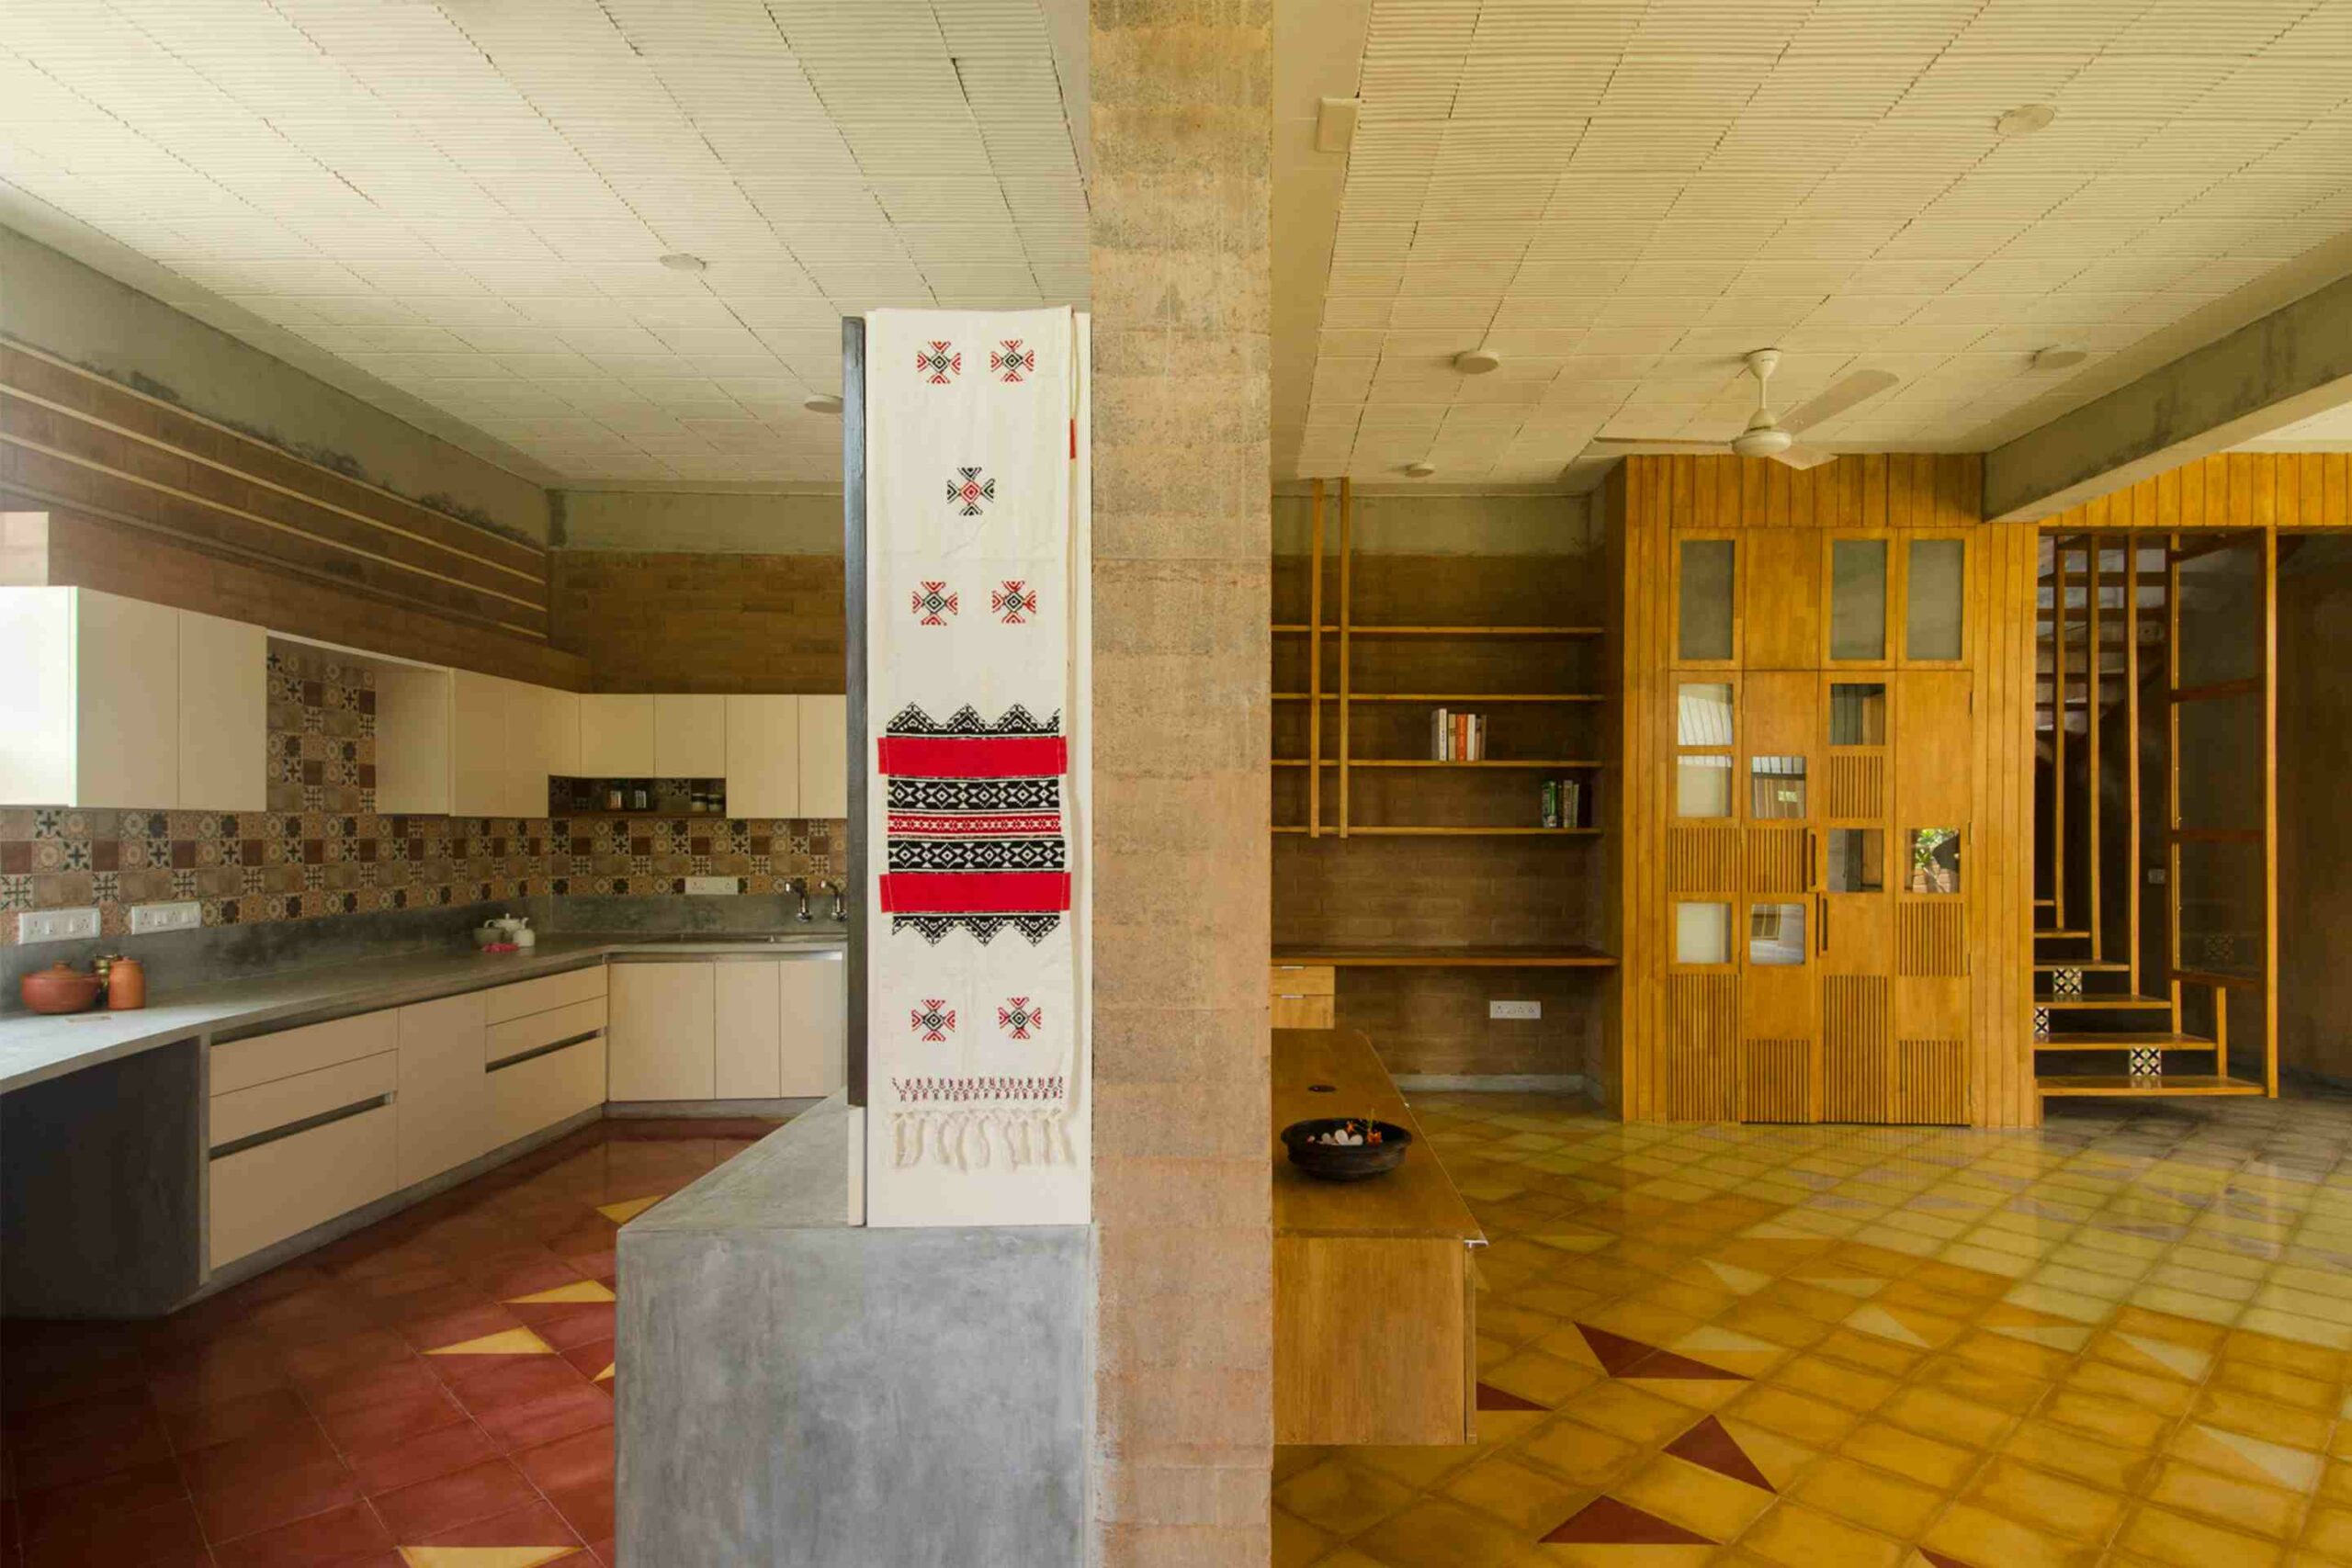 The kitchen and living room have walls made out of compressed stabilised earth blocks